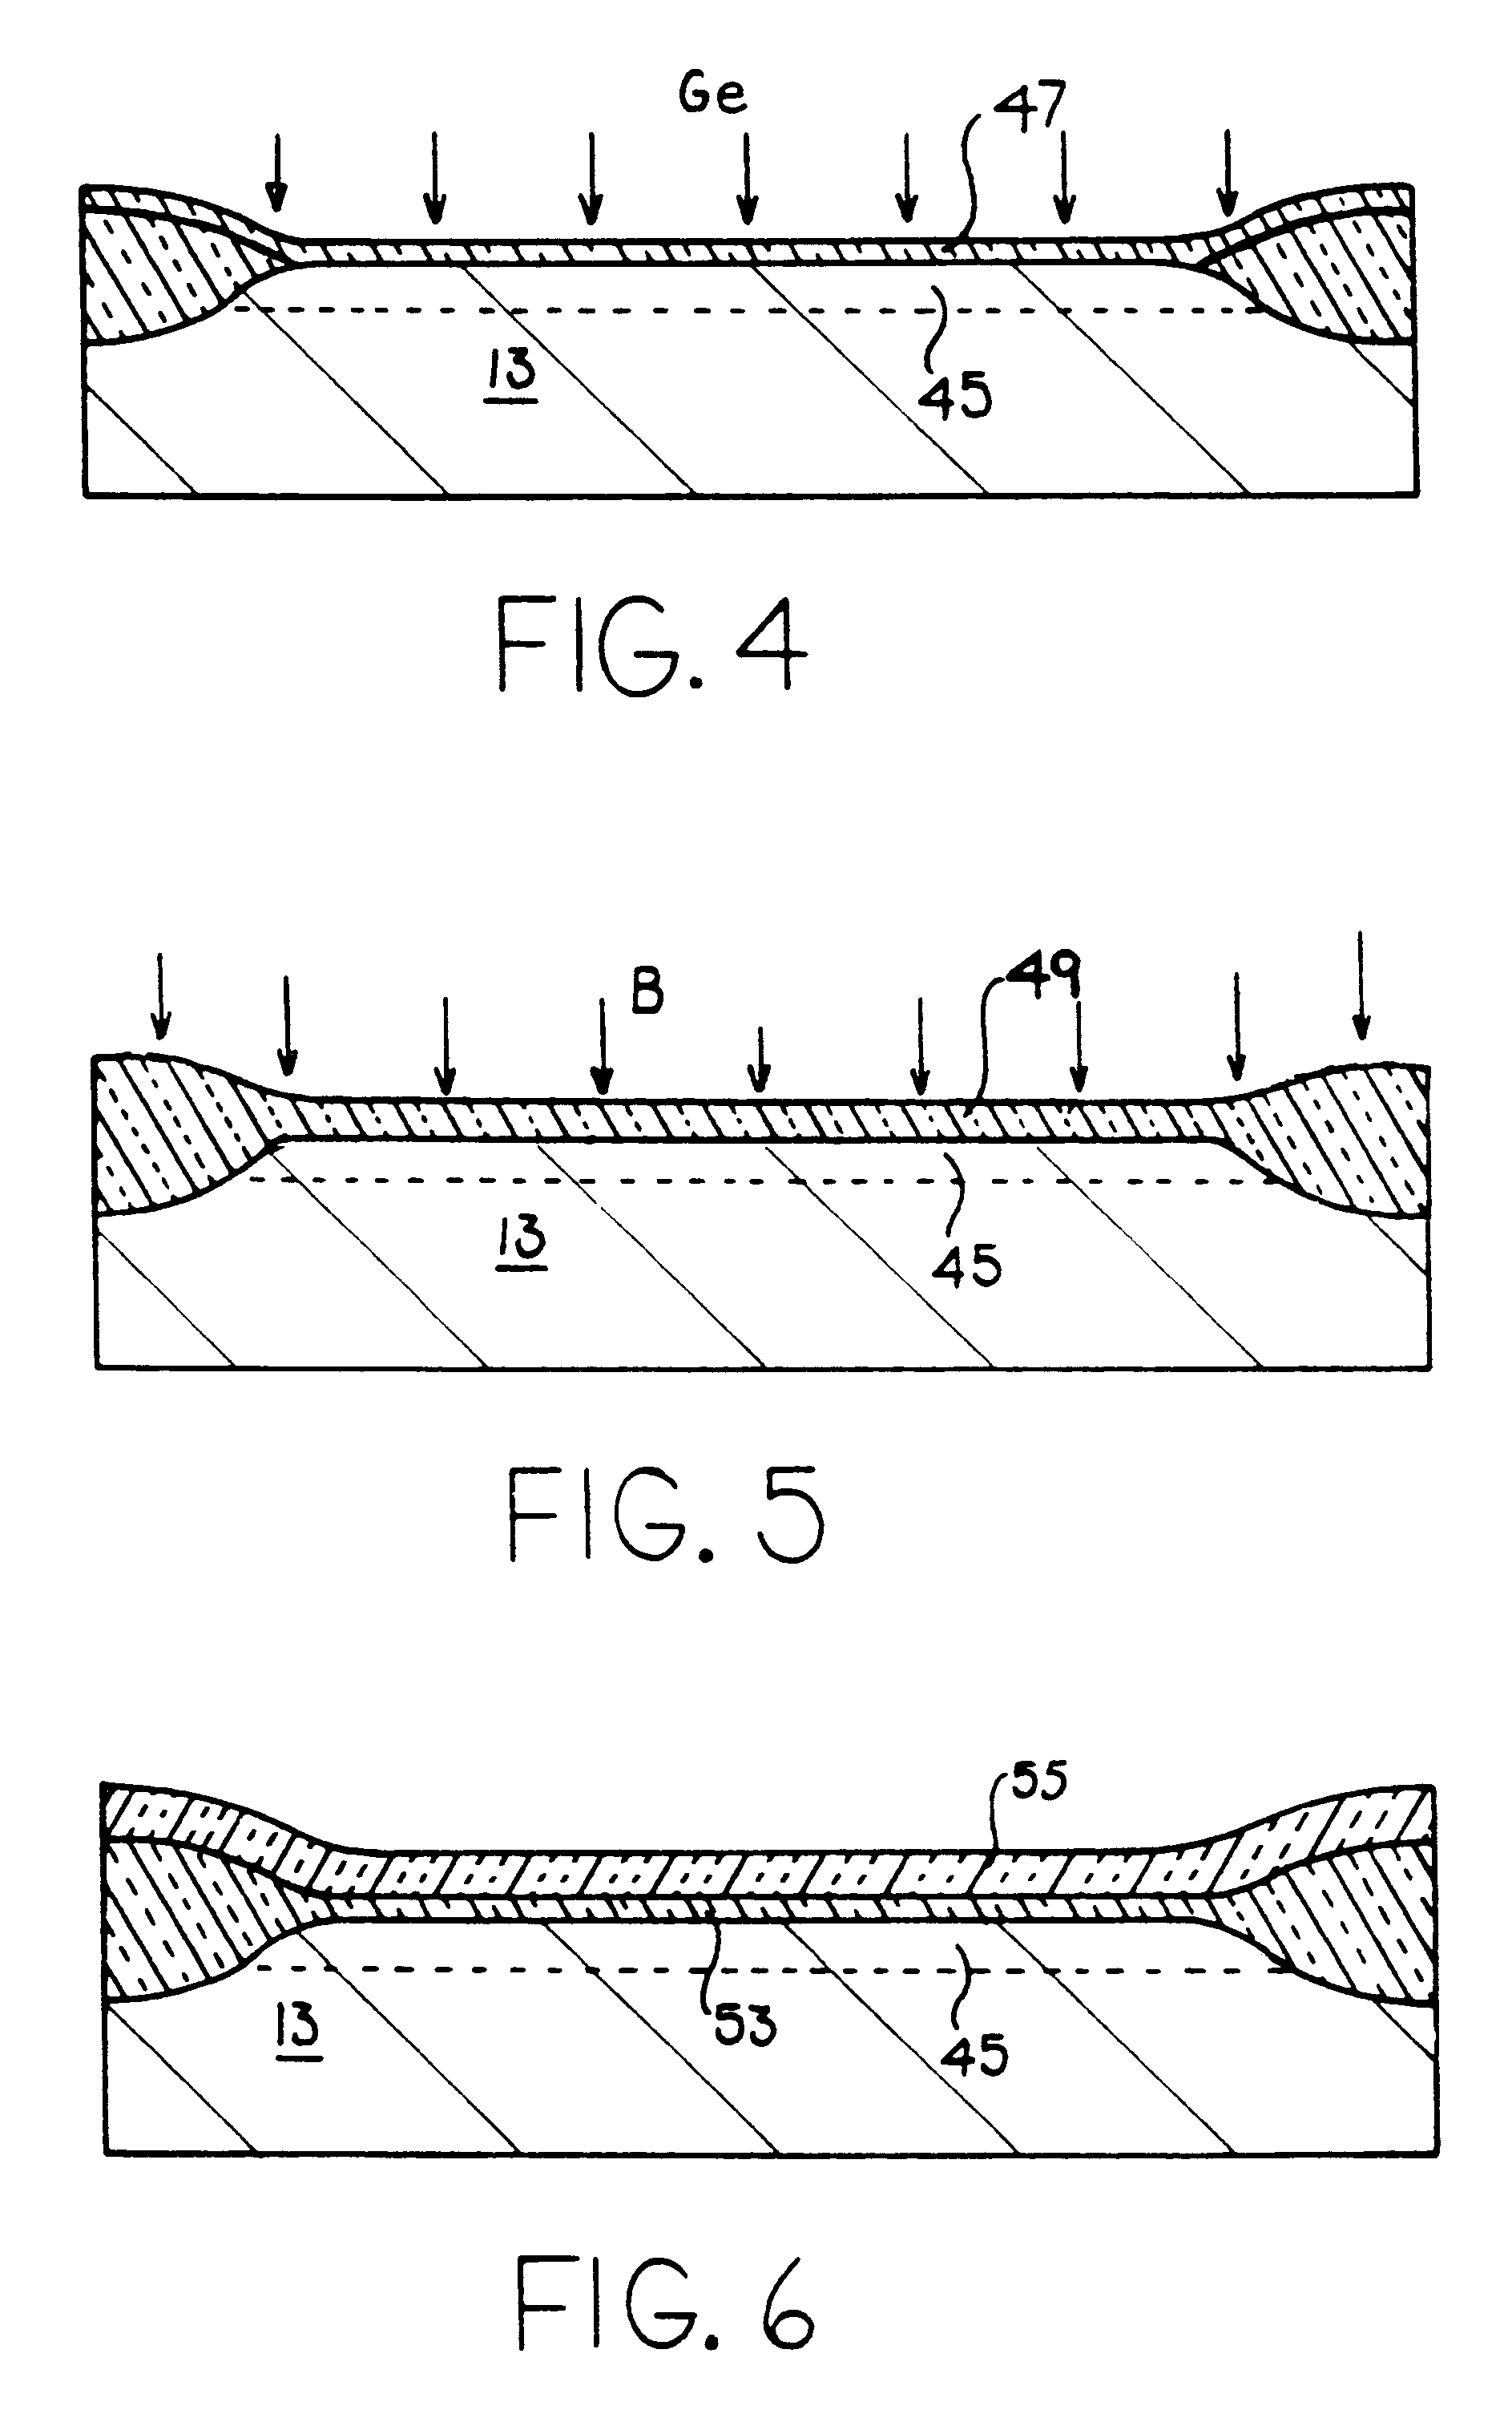 High performance sub-micron P-channel transistor with germanium implant